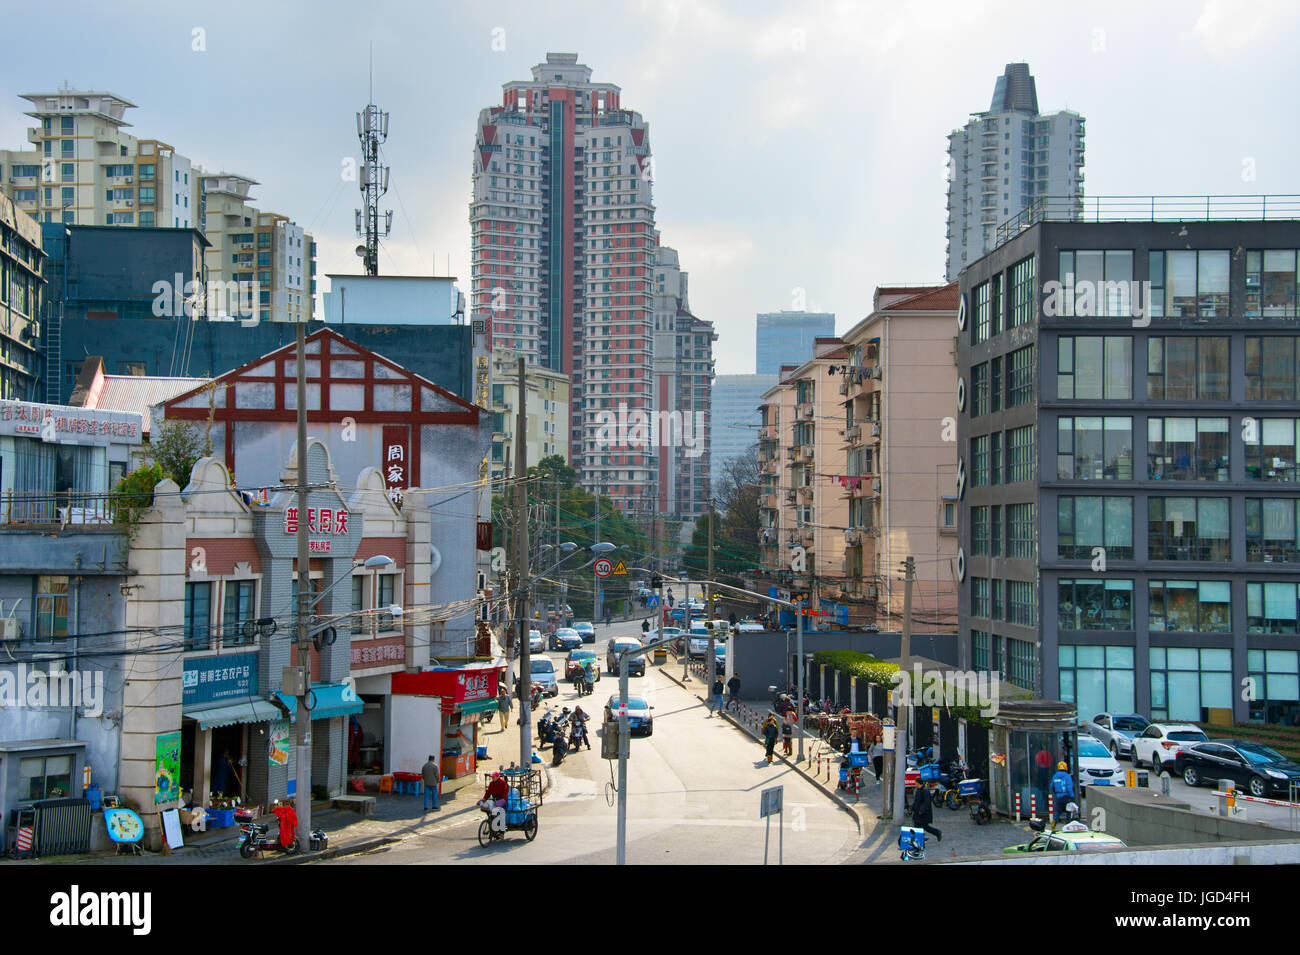 SHANGHAI, CHINA - DEC 27, 2017: View of Shanghai street on the day. Shanghai is the most populous city in the world, with a population of more than 24 Stock Photo